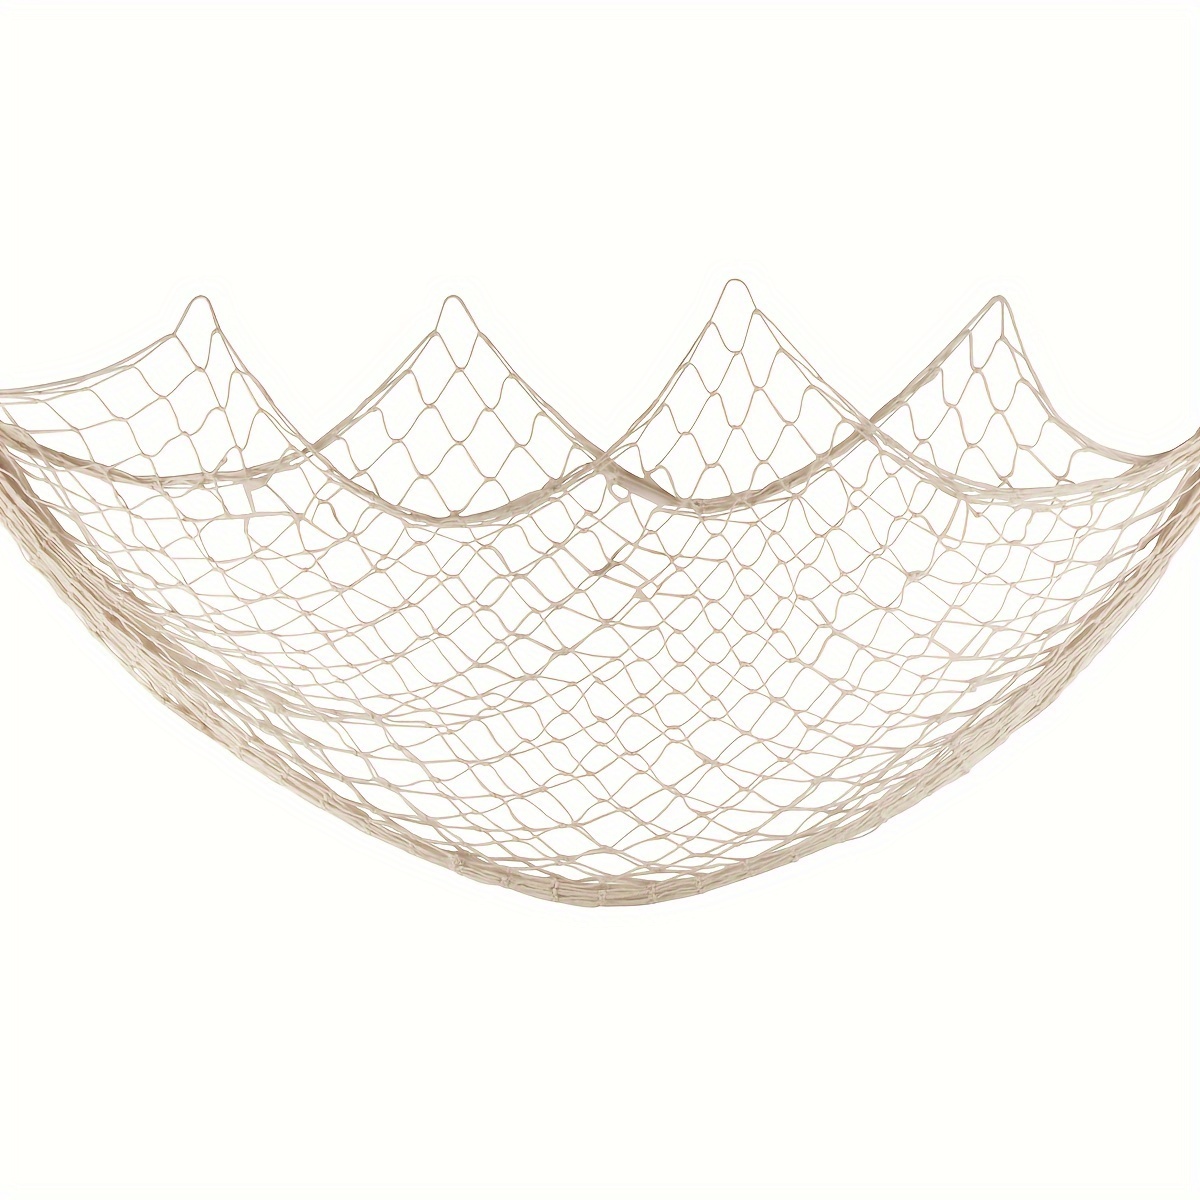 Natural Fish Net Party Decorations for Pirate Party, Hawaiian Party, N